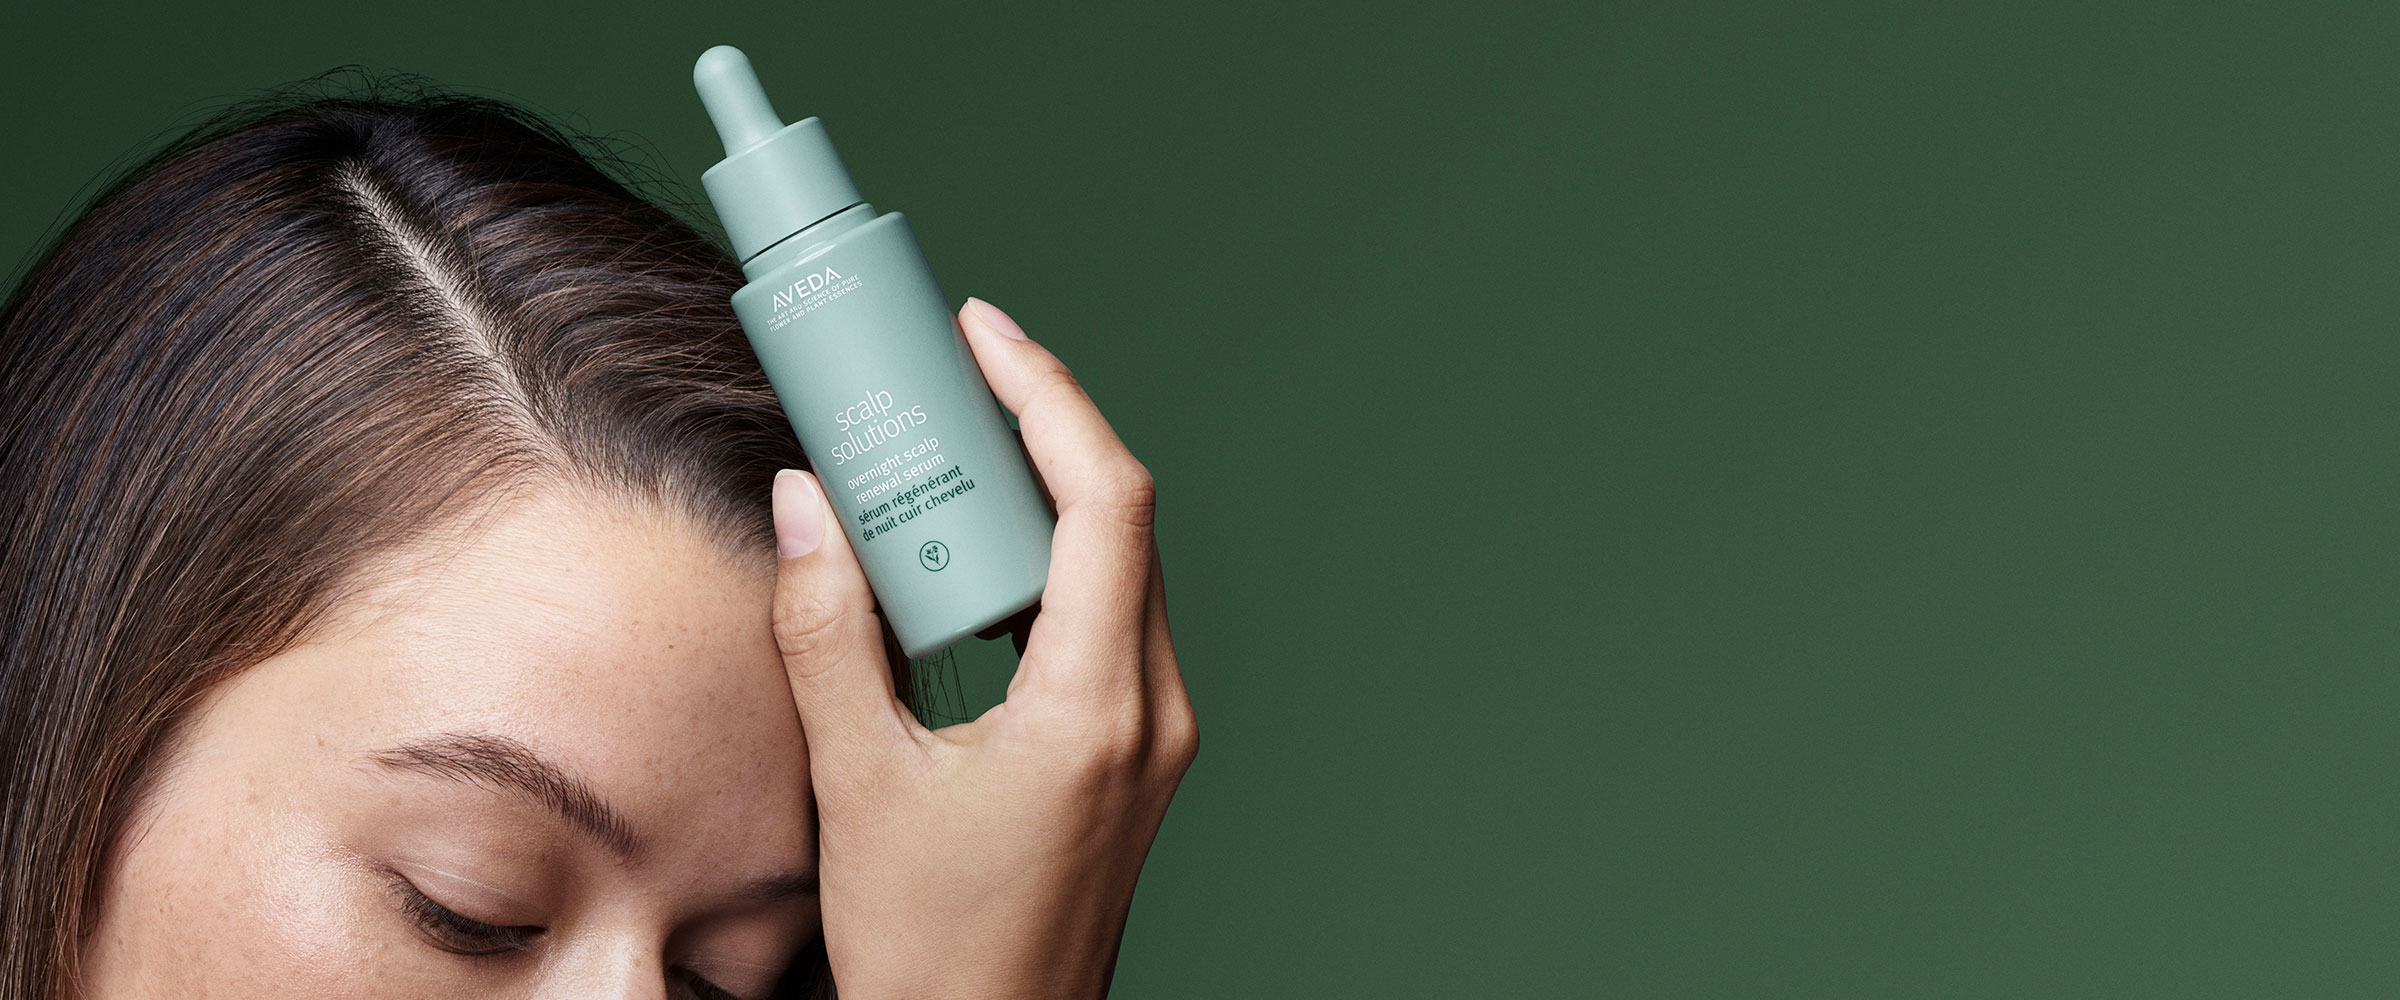 Shop Aveda's scalp solutions overnight scalp renewal serum improving scalp hydration by 51% in one night.